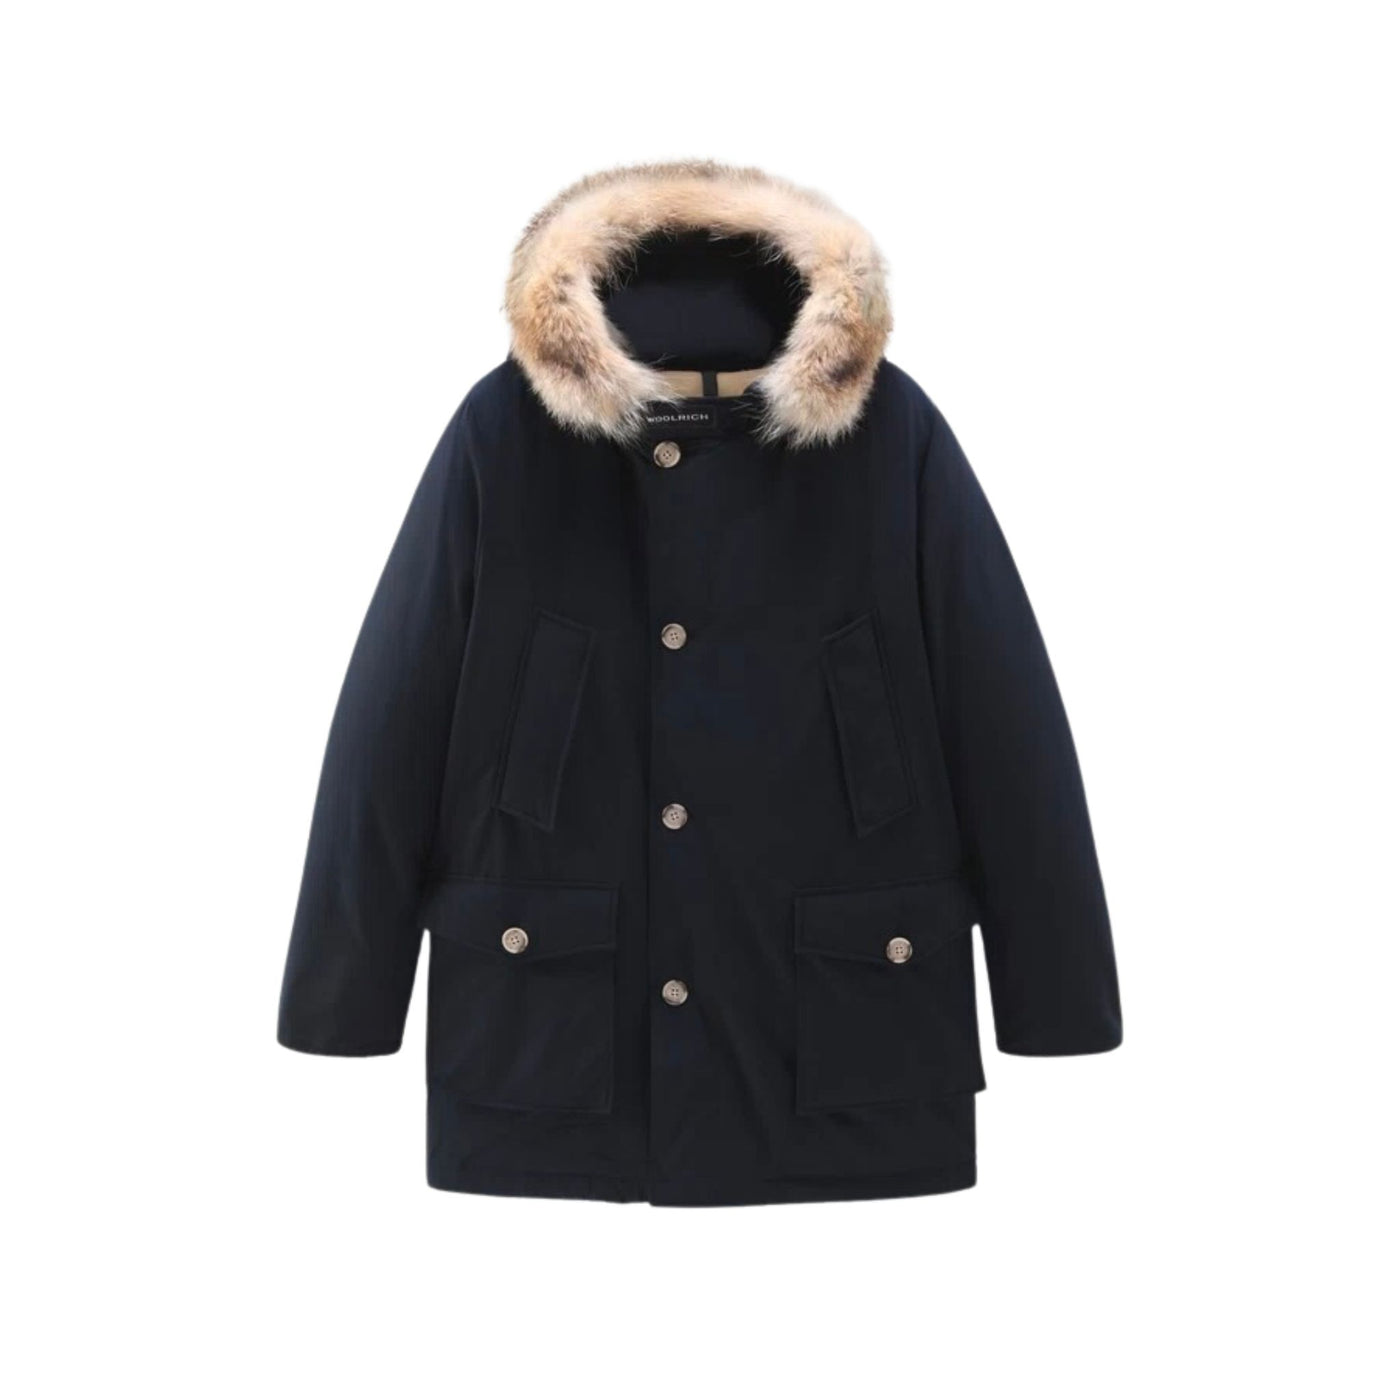 Men's jacket padded with fur